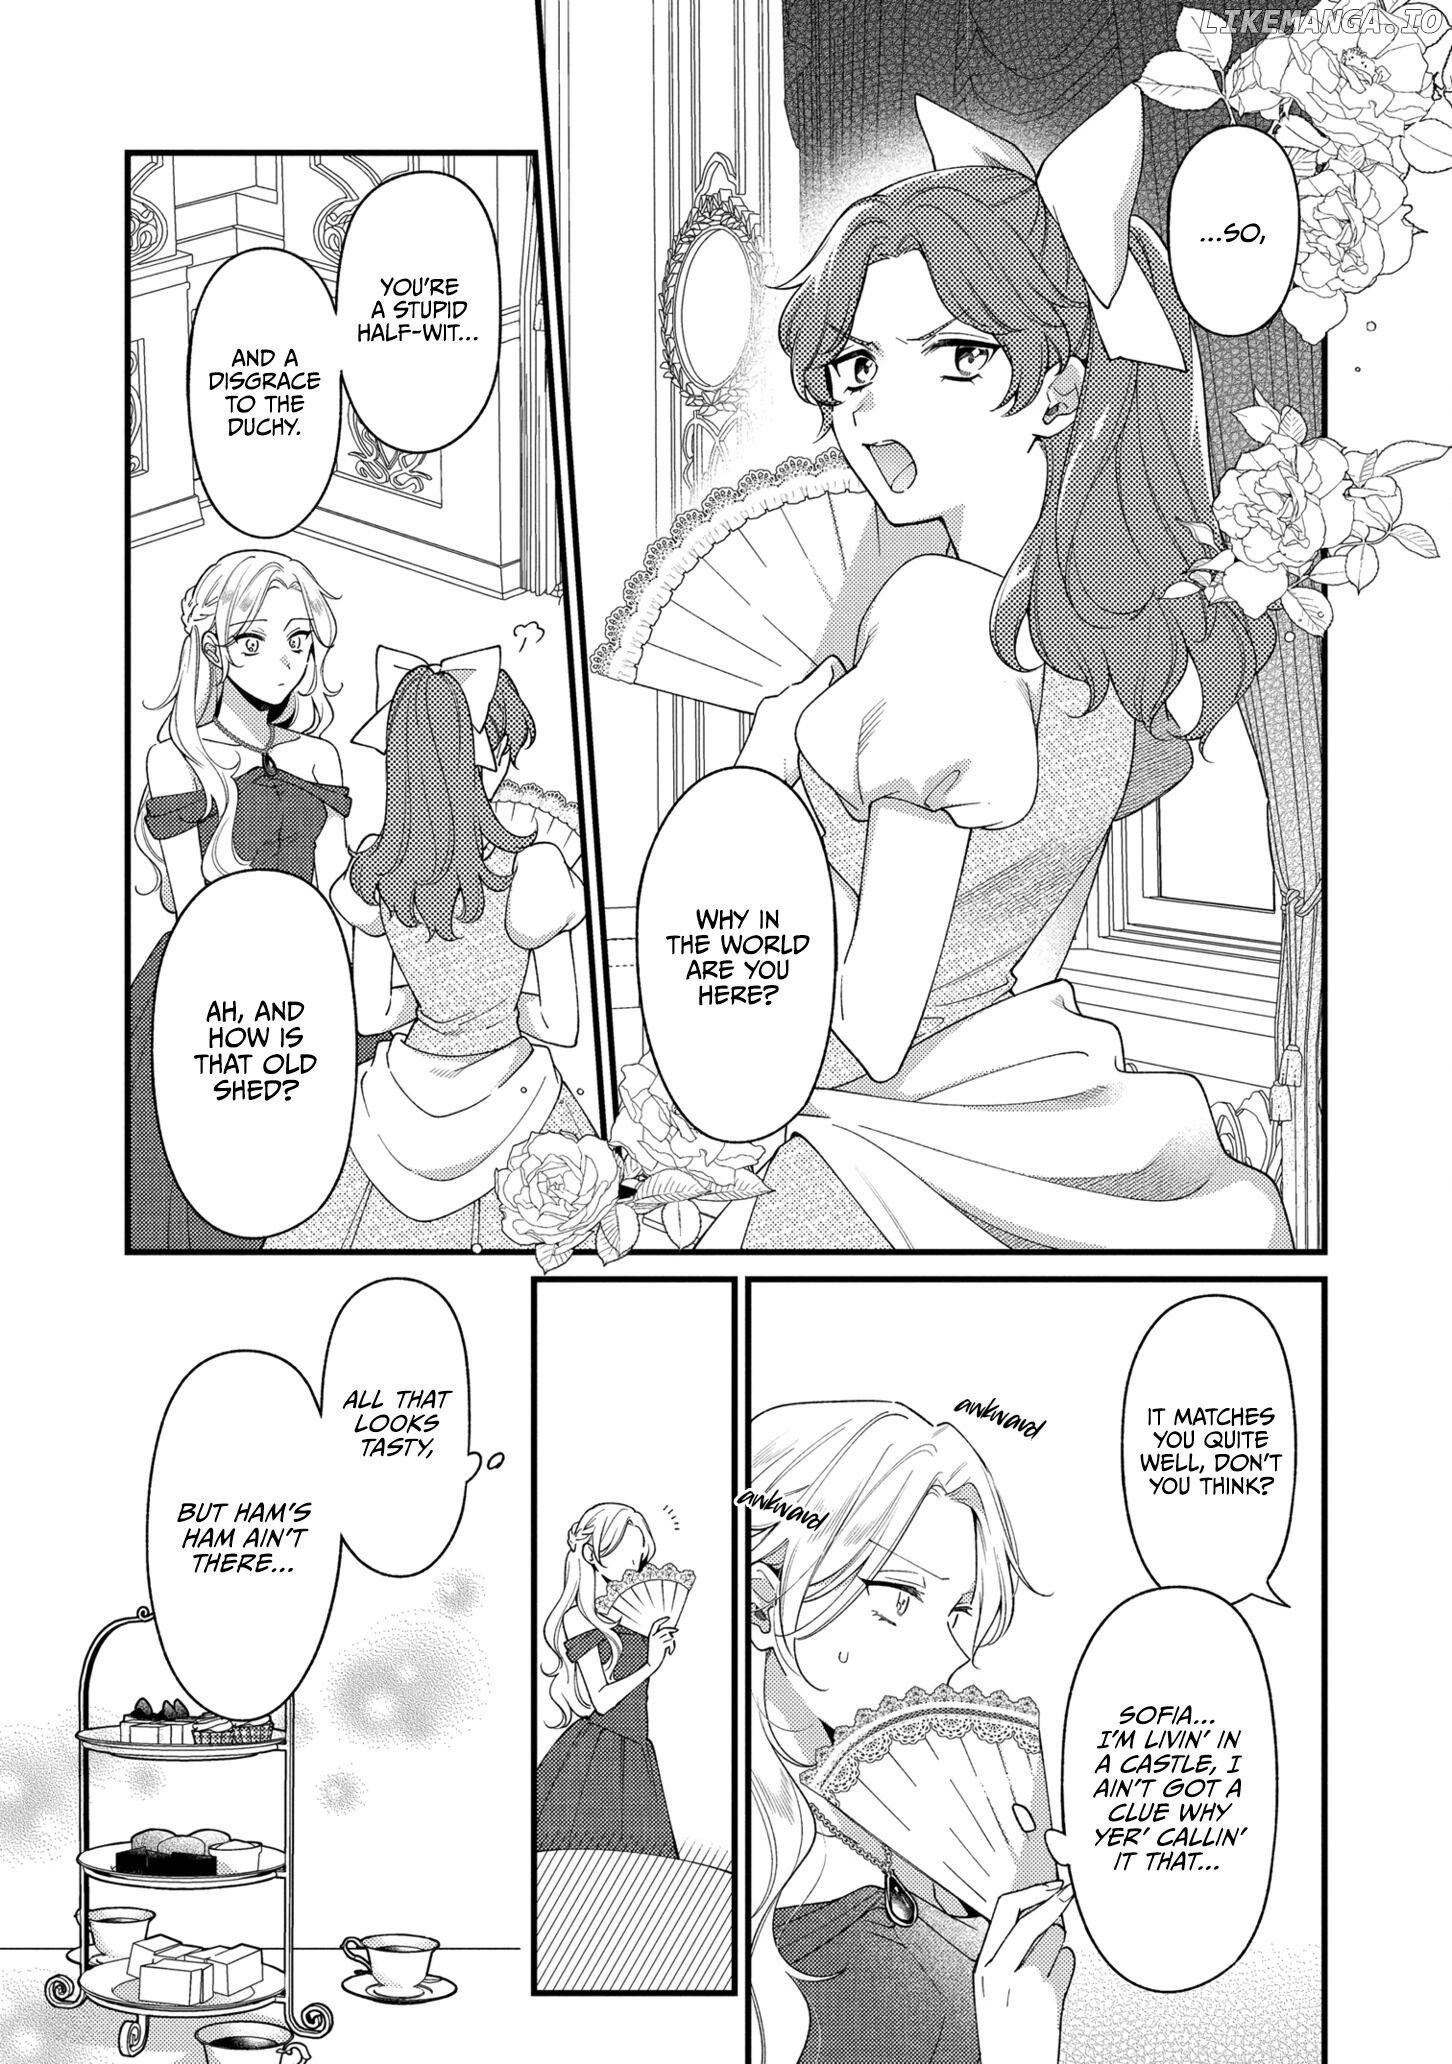 The Silent Daughter of a Duke and the Cold Emperor ~ The Child I Found in My Past Life Became the Emperor ~ Chapter 6 - page 7